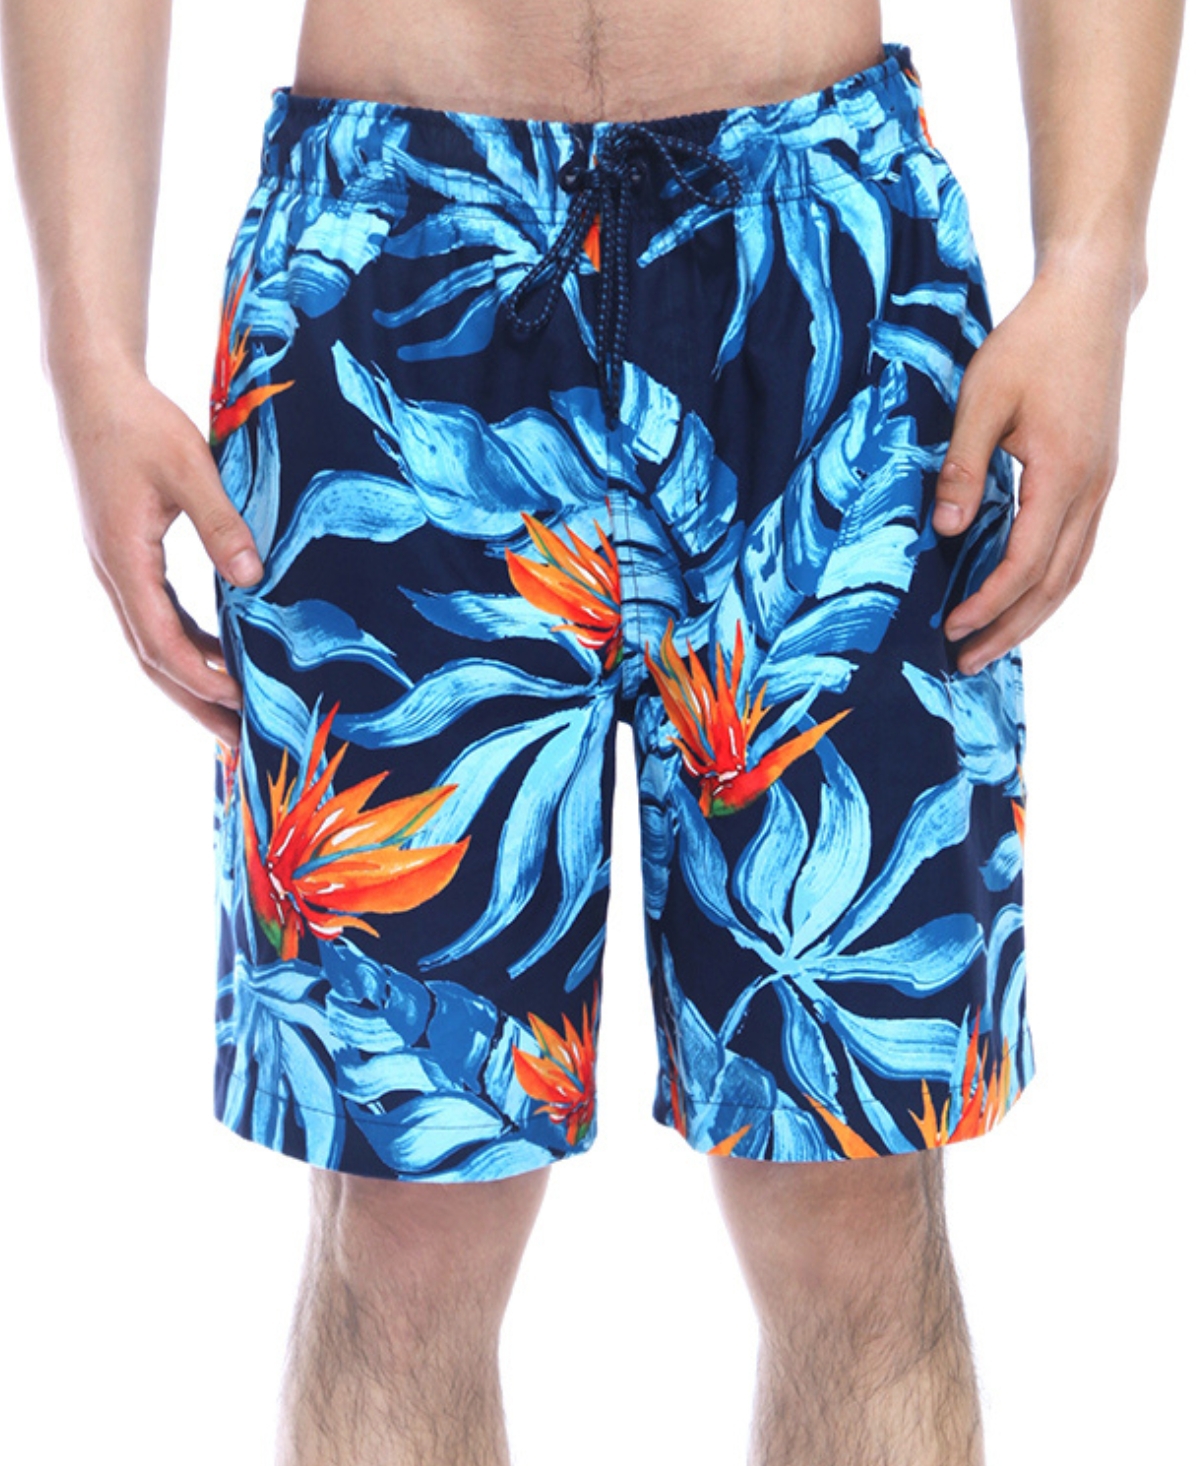 Men's 8" Mesh Lined Swim Trunks, up to Size 2XL - Stripes printed